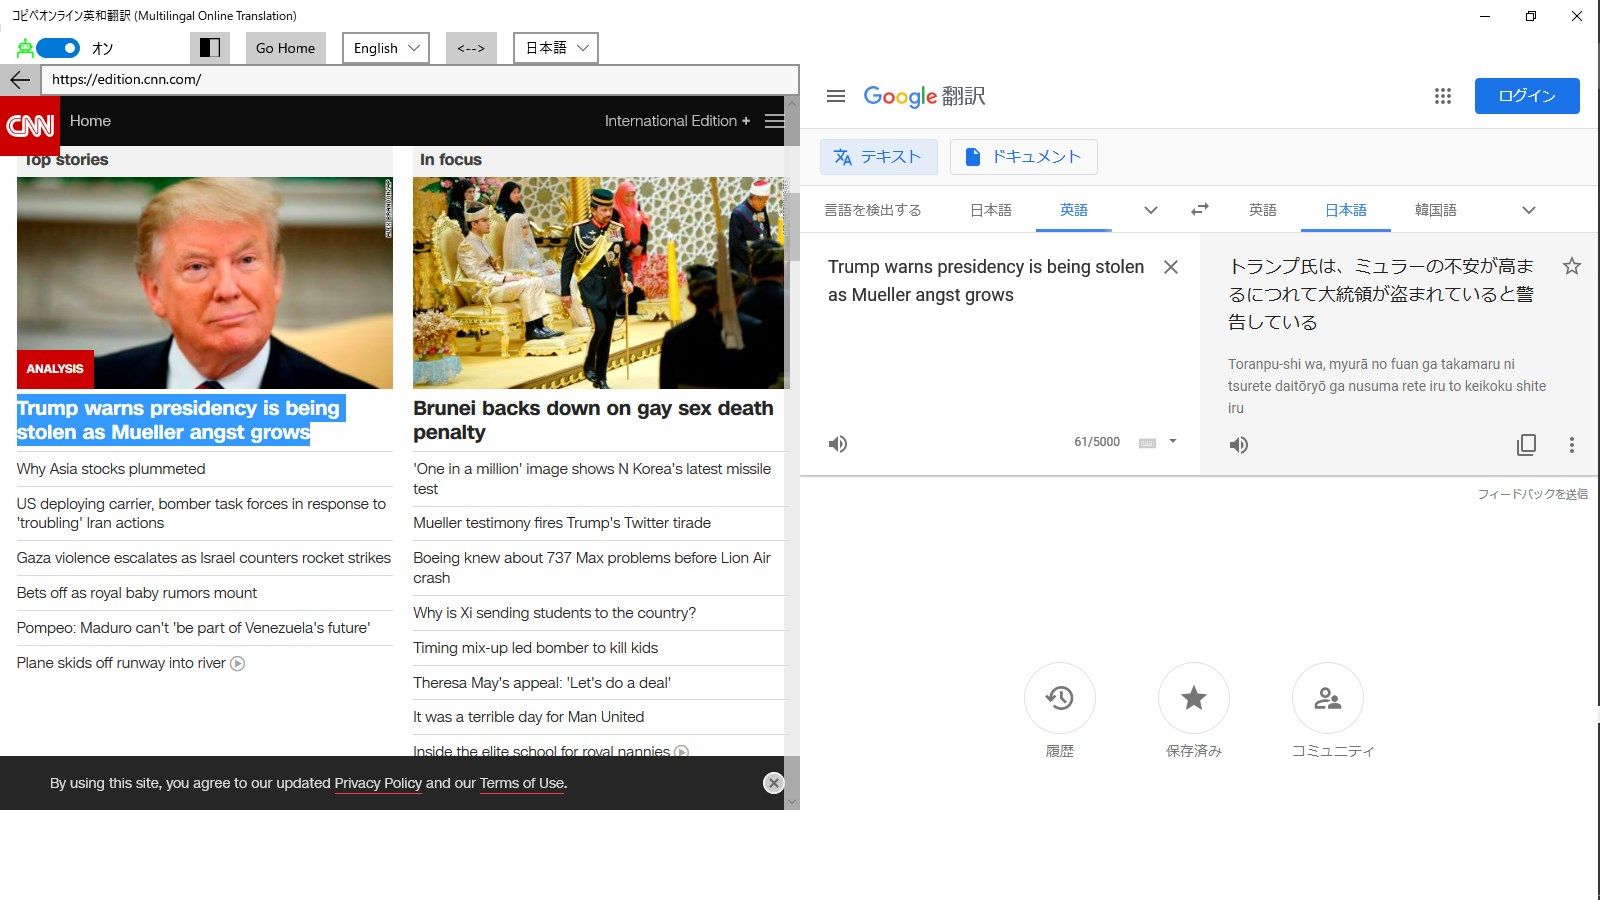 In 2-screen mode, the left side is the web browser, and the right side is the translation screen.